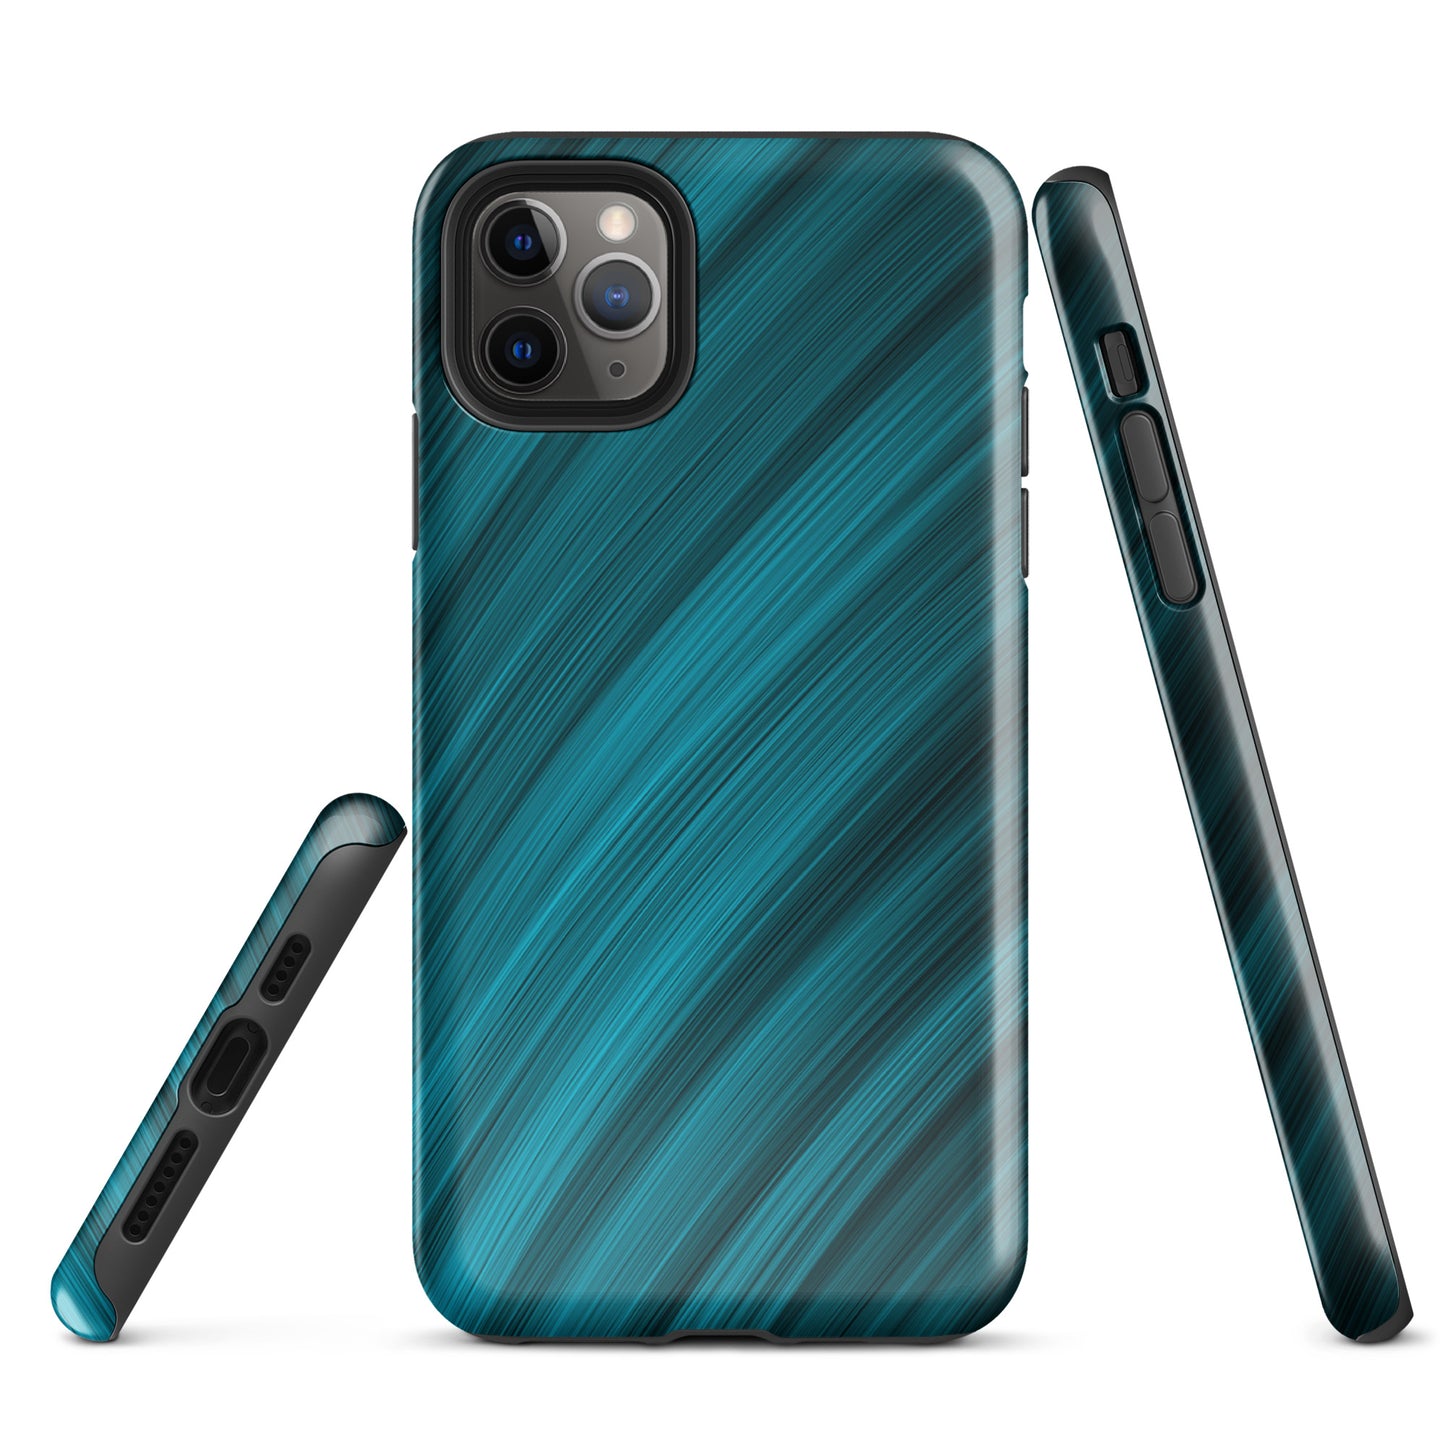 A Light Blue Brush Strokes Case for the iPhone 11 Pro Max